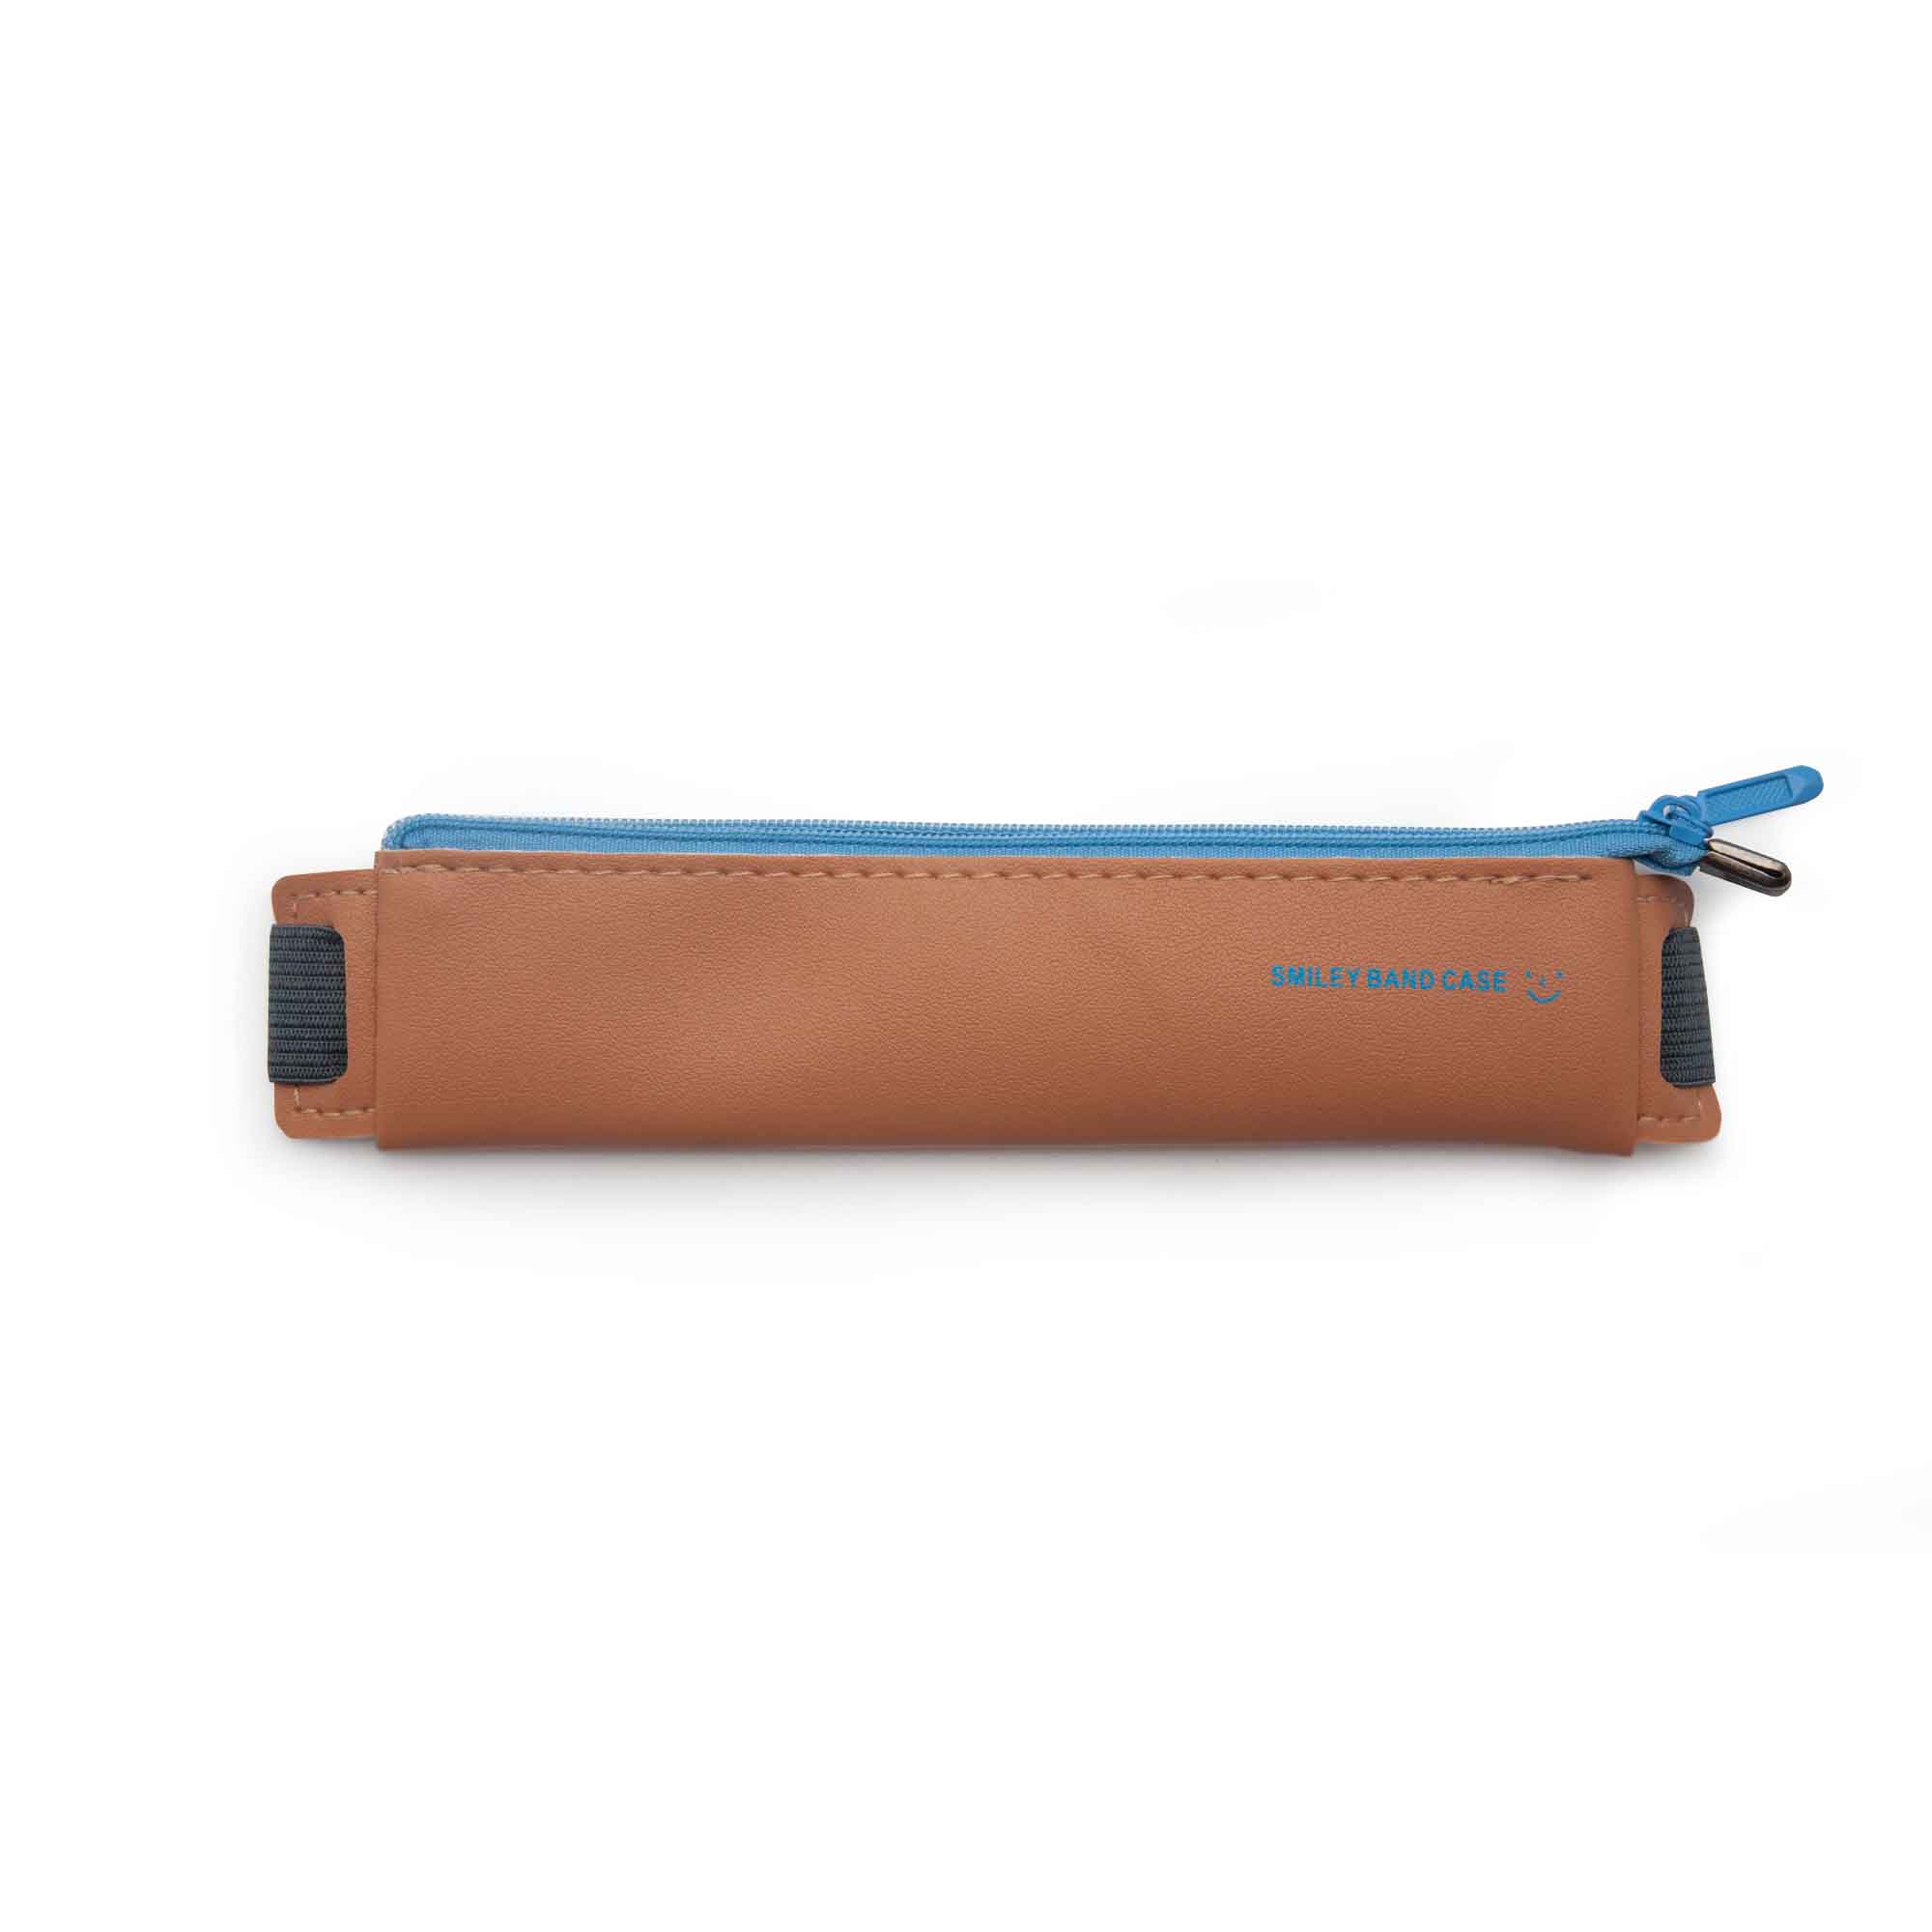 Image shows a brown diary/pencil pouch